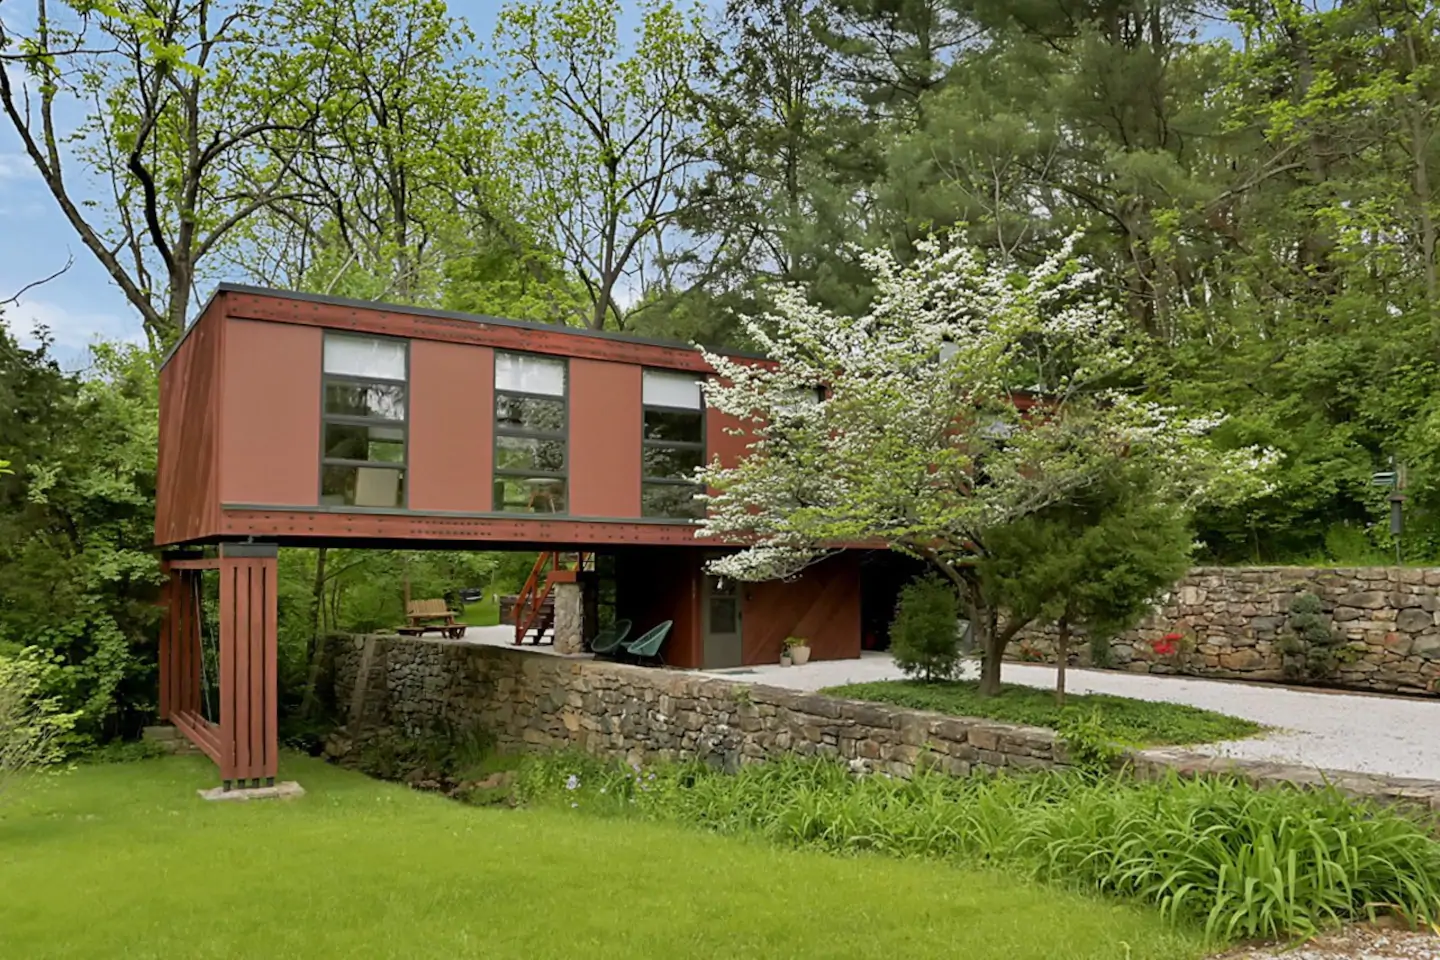 Mid Century Modern home with lots of trees around it.